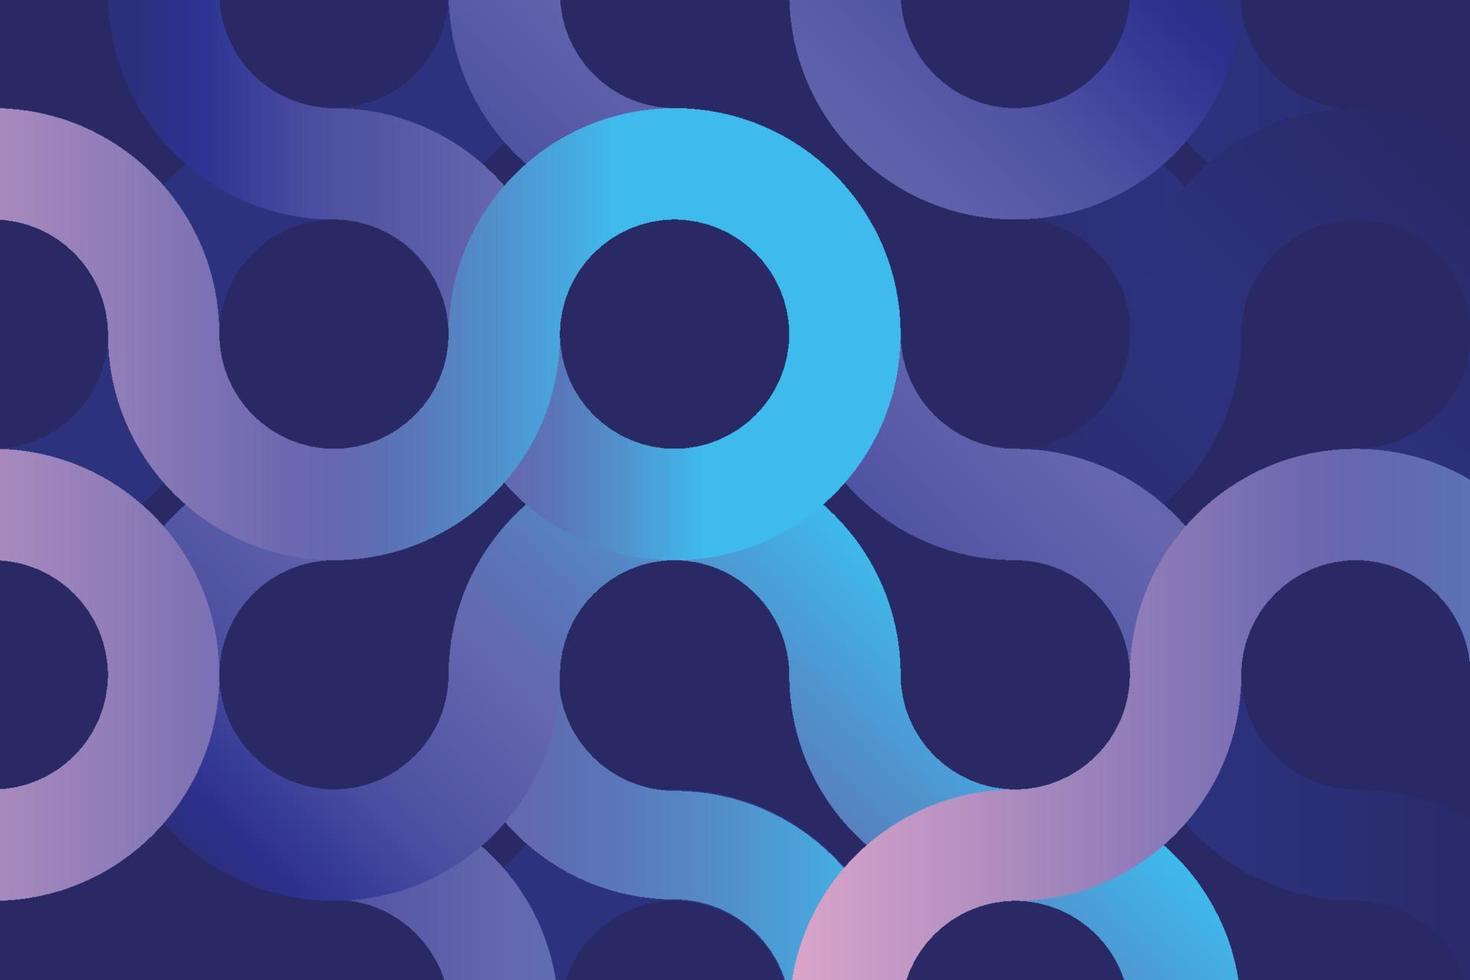 Abstract gradient blue circle overlapping decorative shapes on black background with gloss effect vector